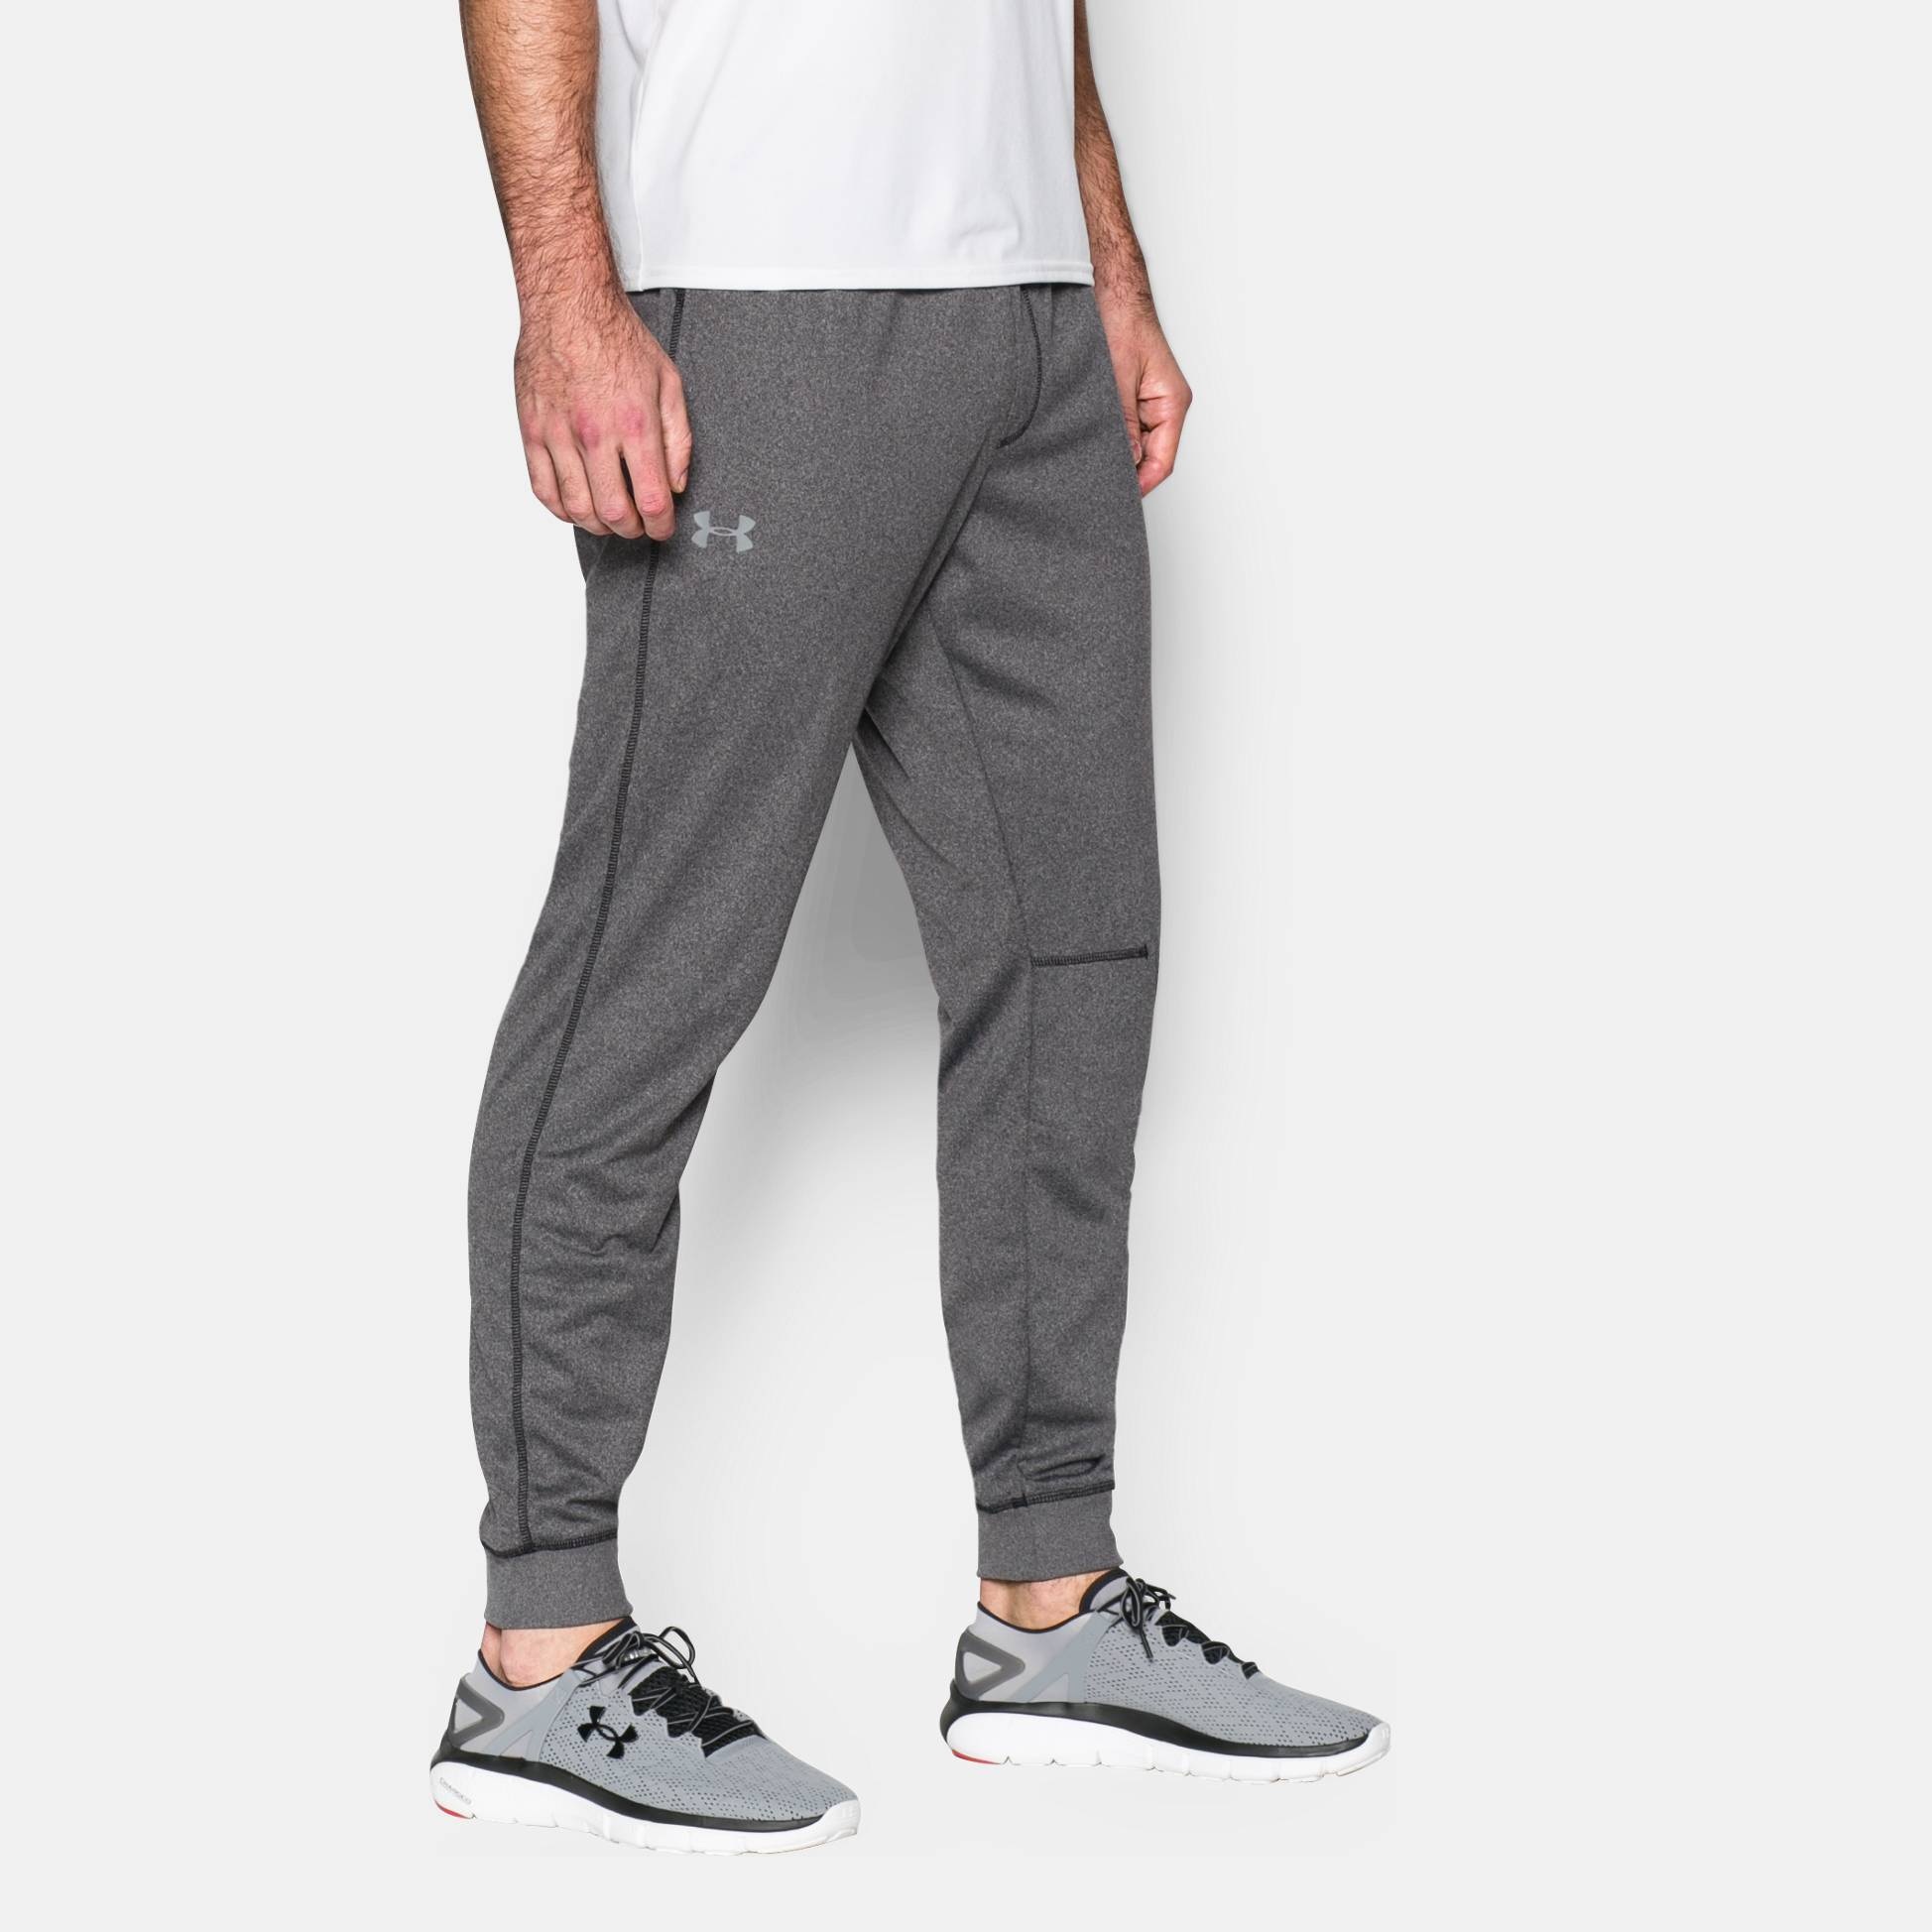 https://img1.sportconcept.com/backend_nou/content/images/fitness-sportstyle-jogger-20160323161547.jpg